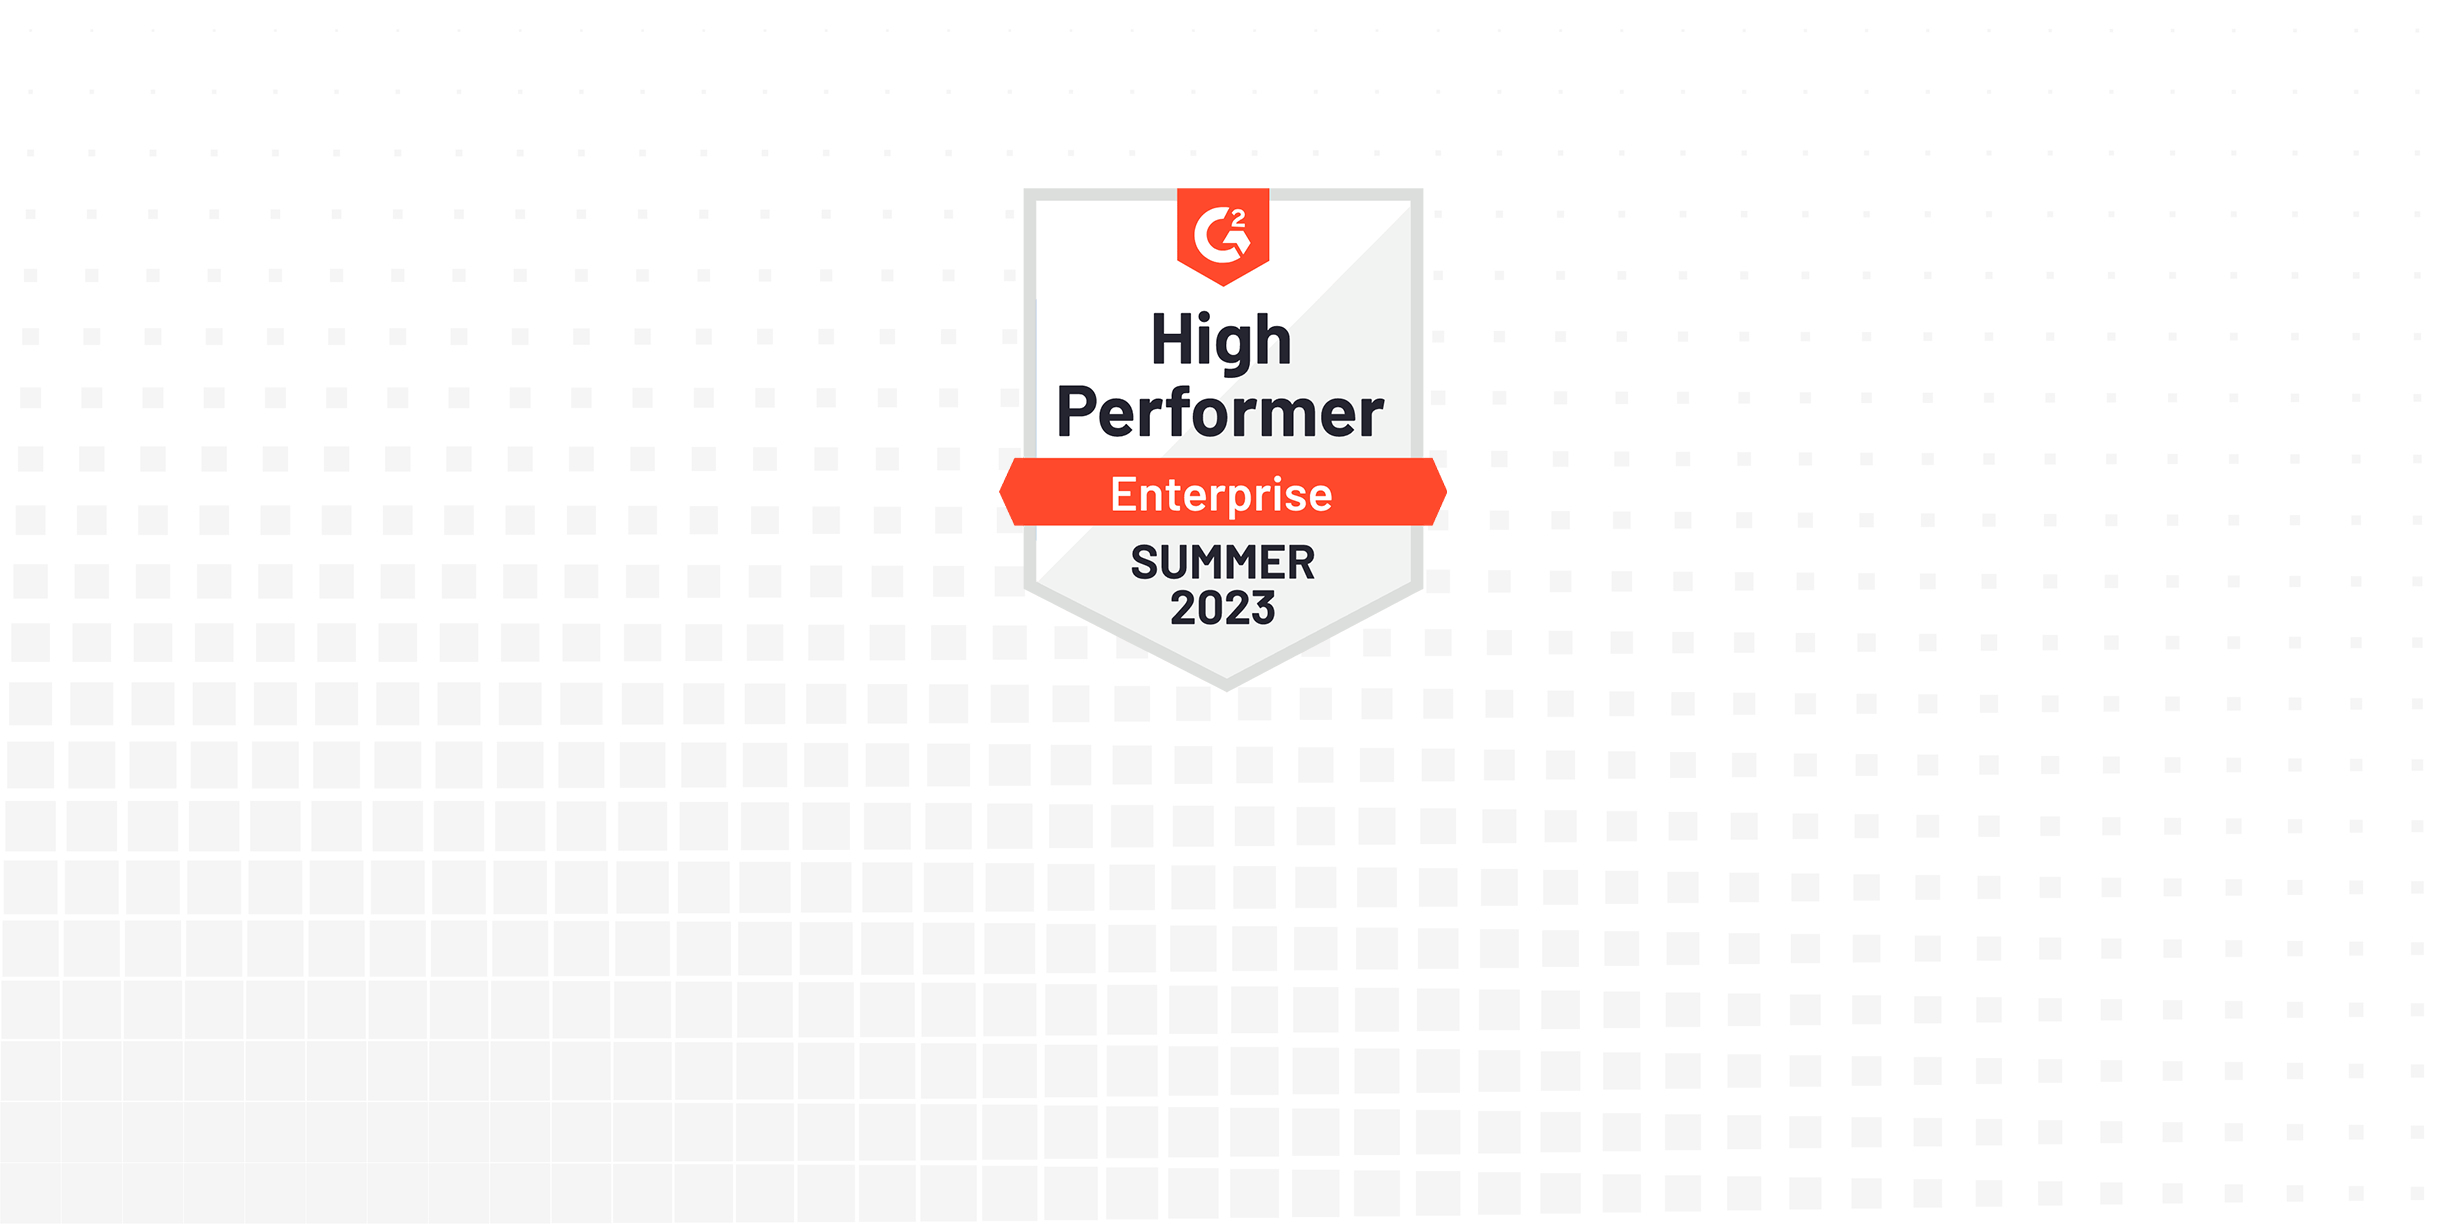 Bright Pattern Ranked #1 Across Multiple Categories in G2 Crowd’s Summer 2023 Report